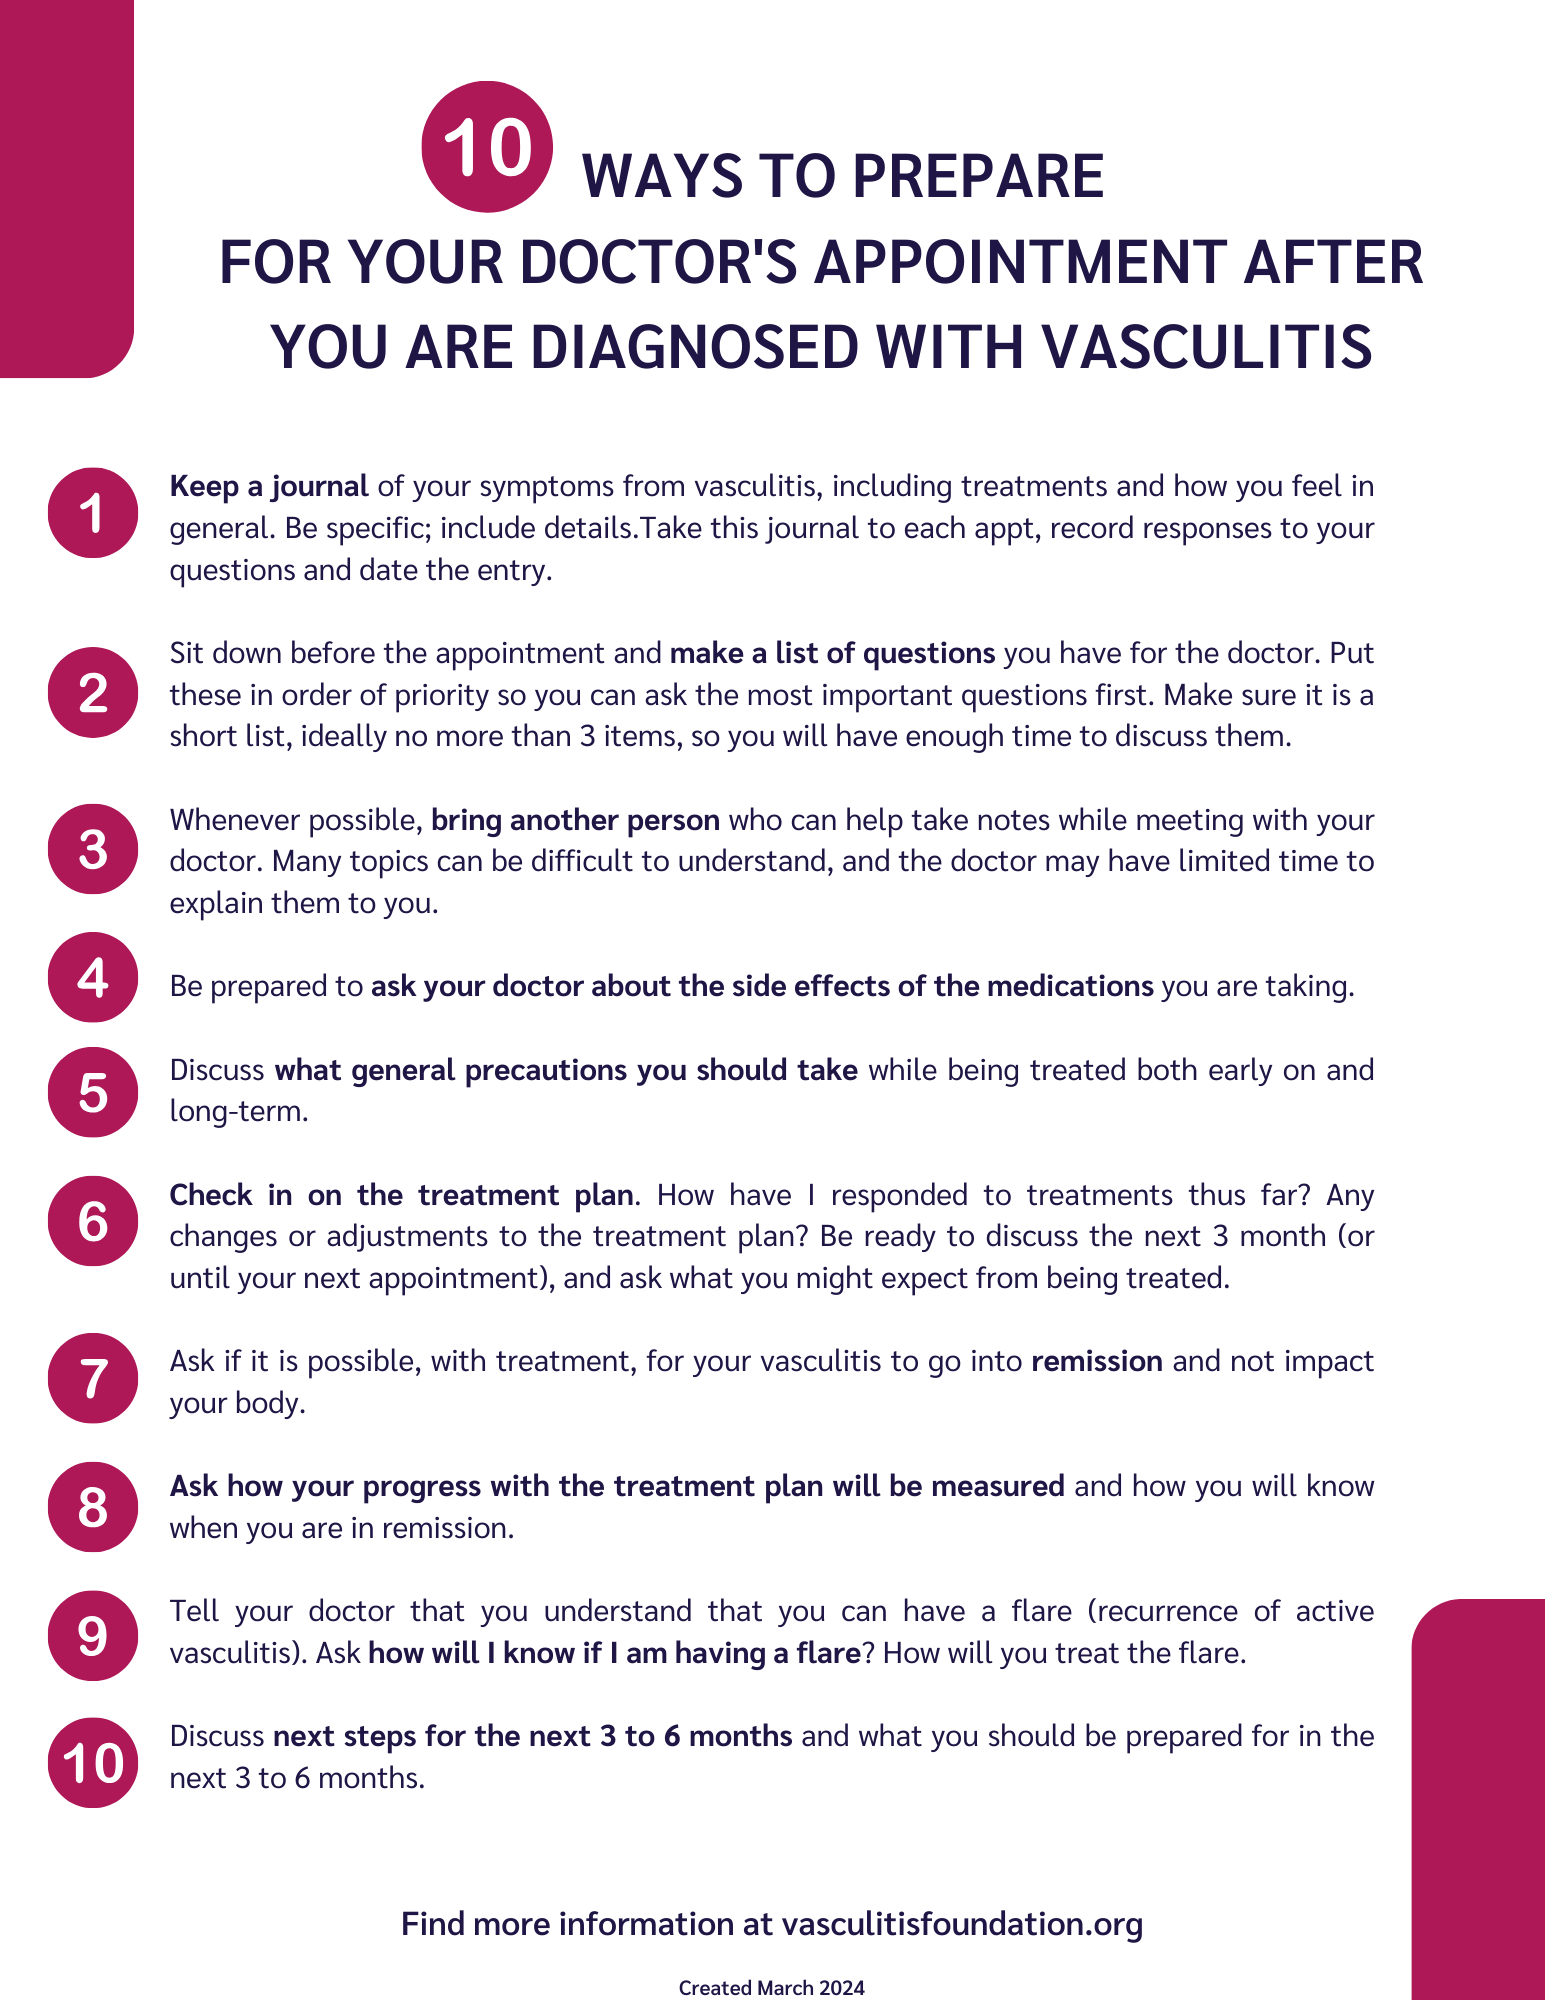 10 Ways to prepare before an appointment with your doctor.